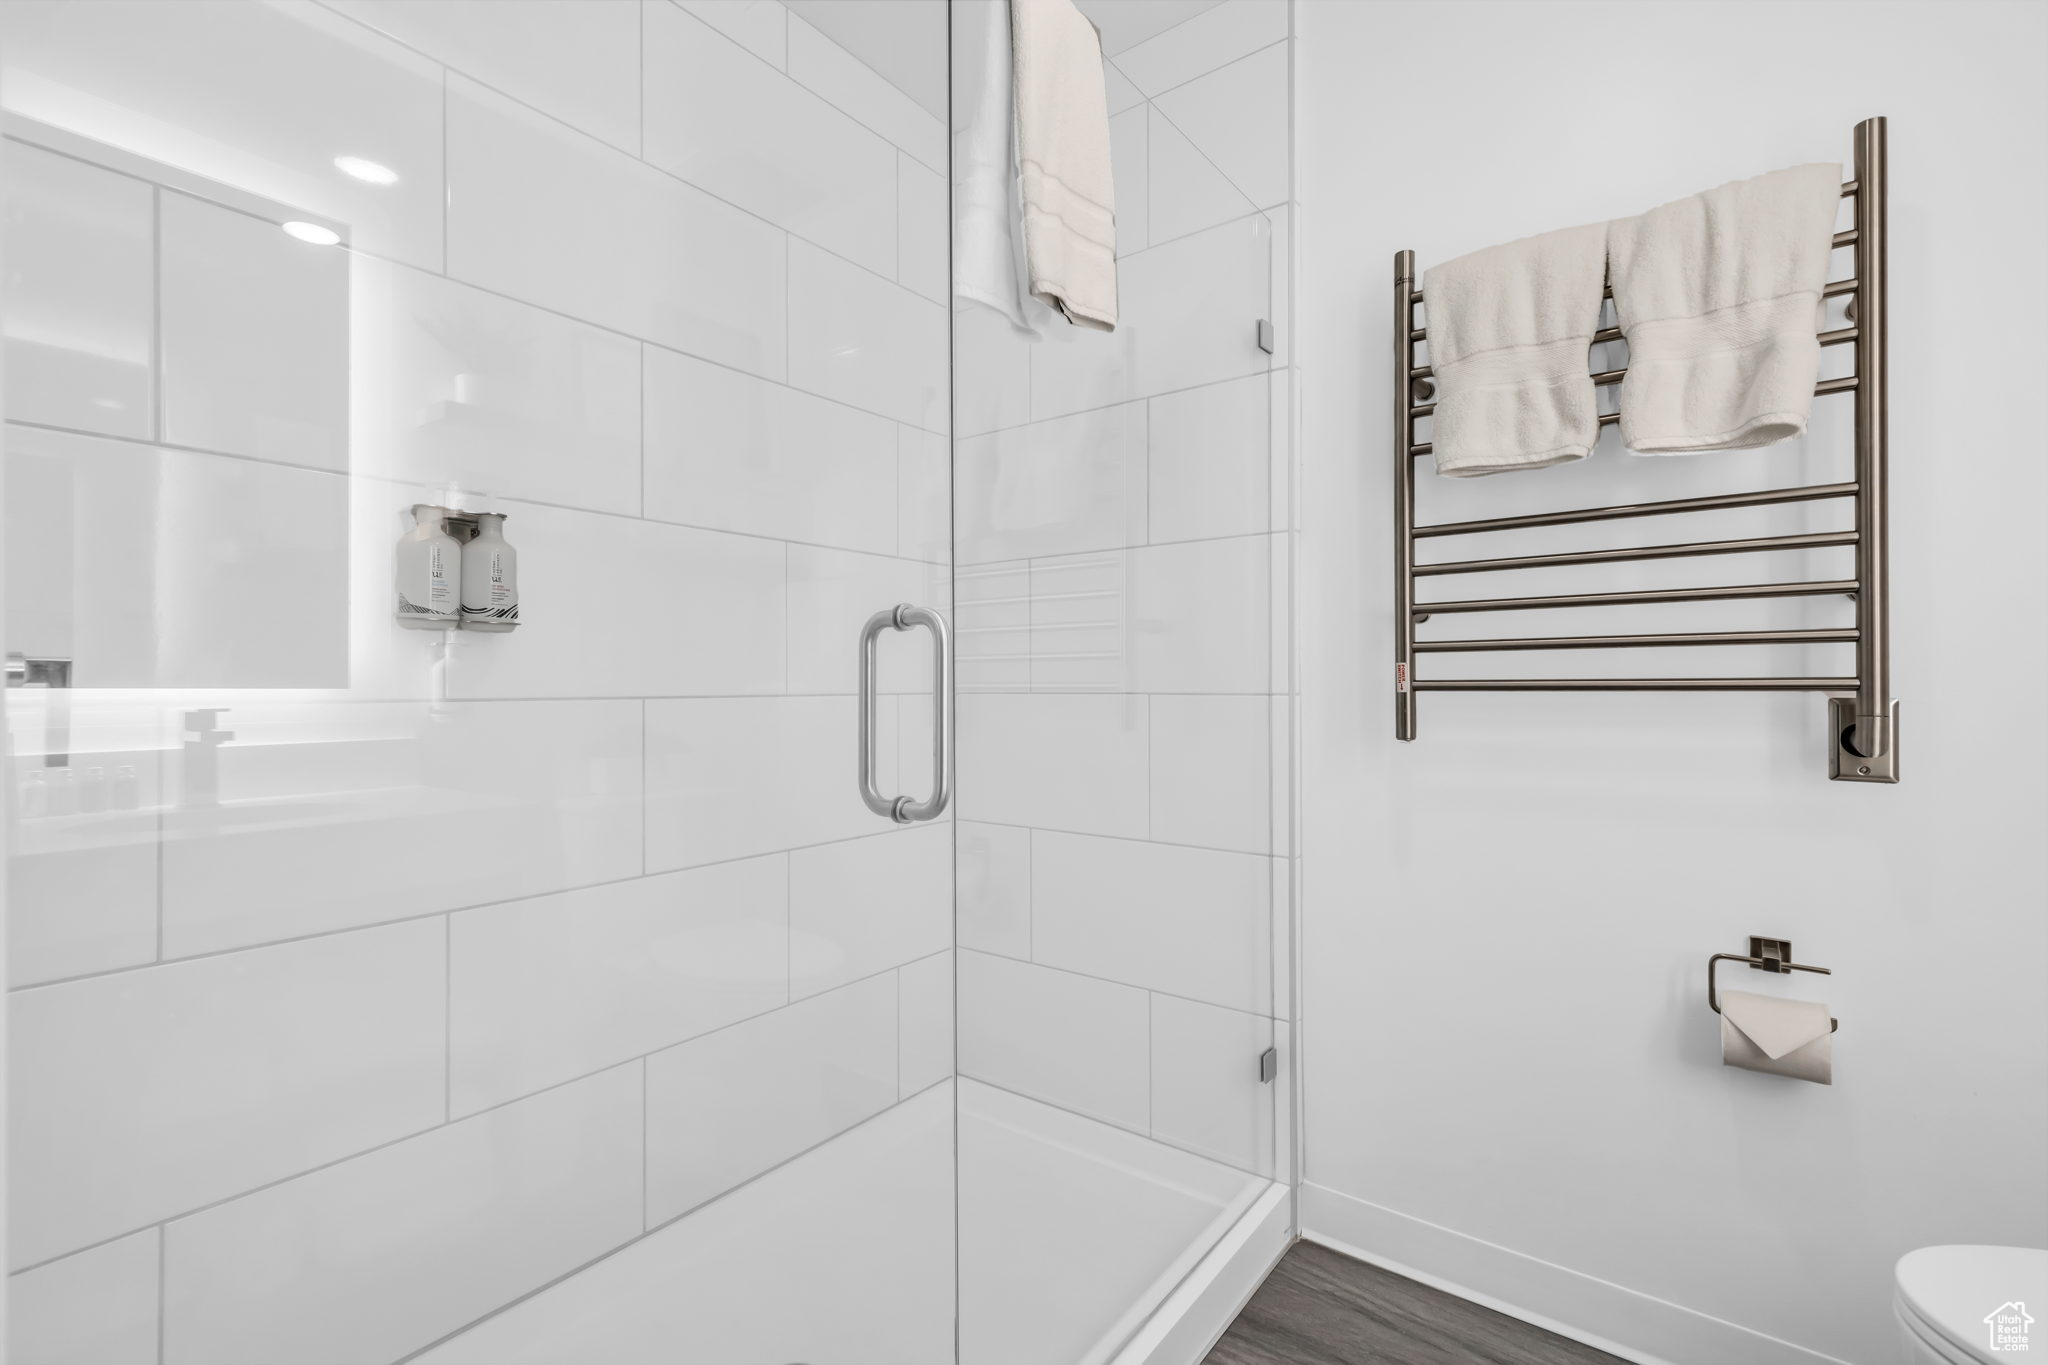 Bathroom with toilet, hardwood / wood-style floors, an enclosed shower, and radiator heating unit